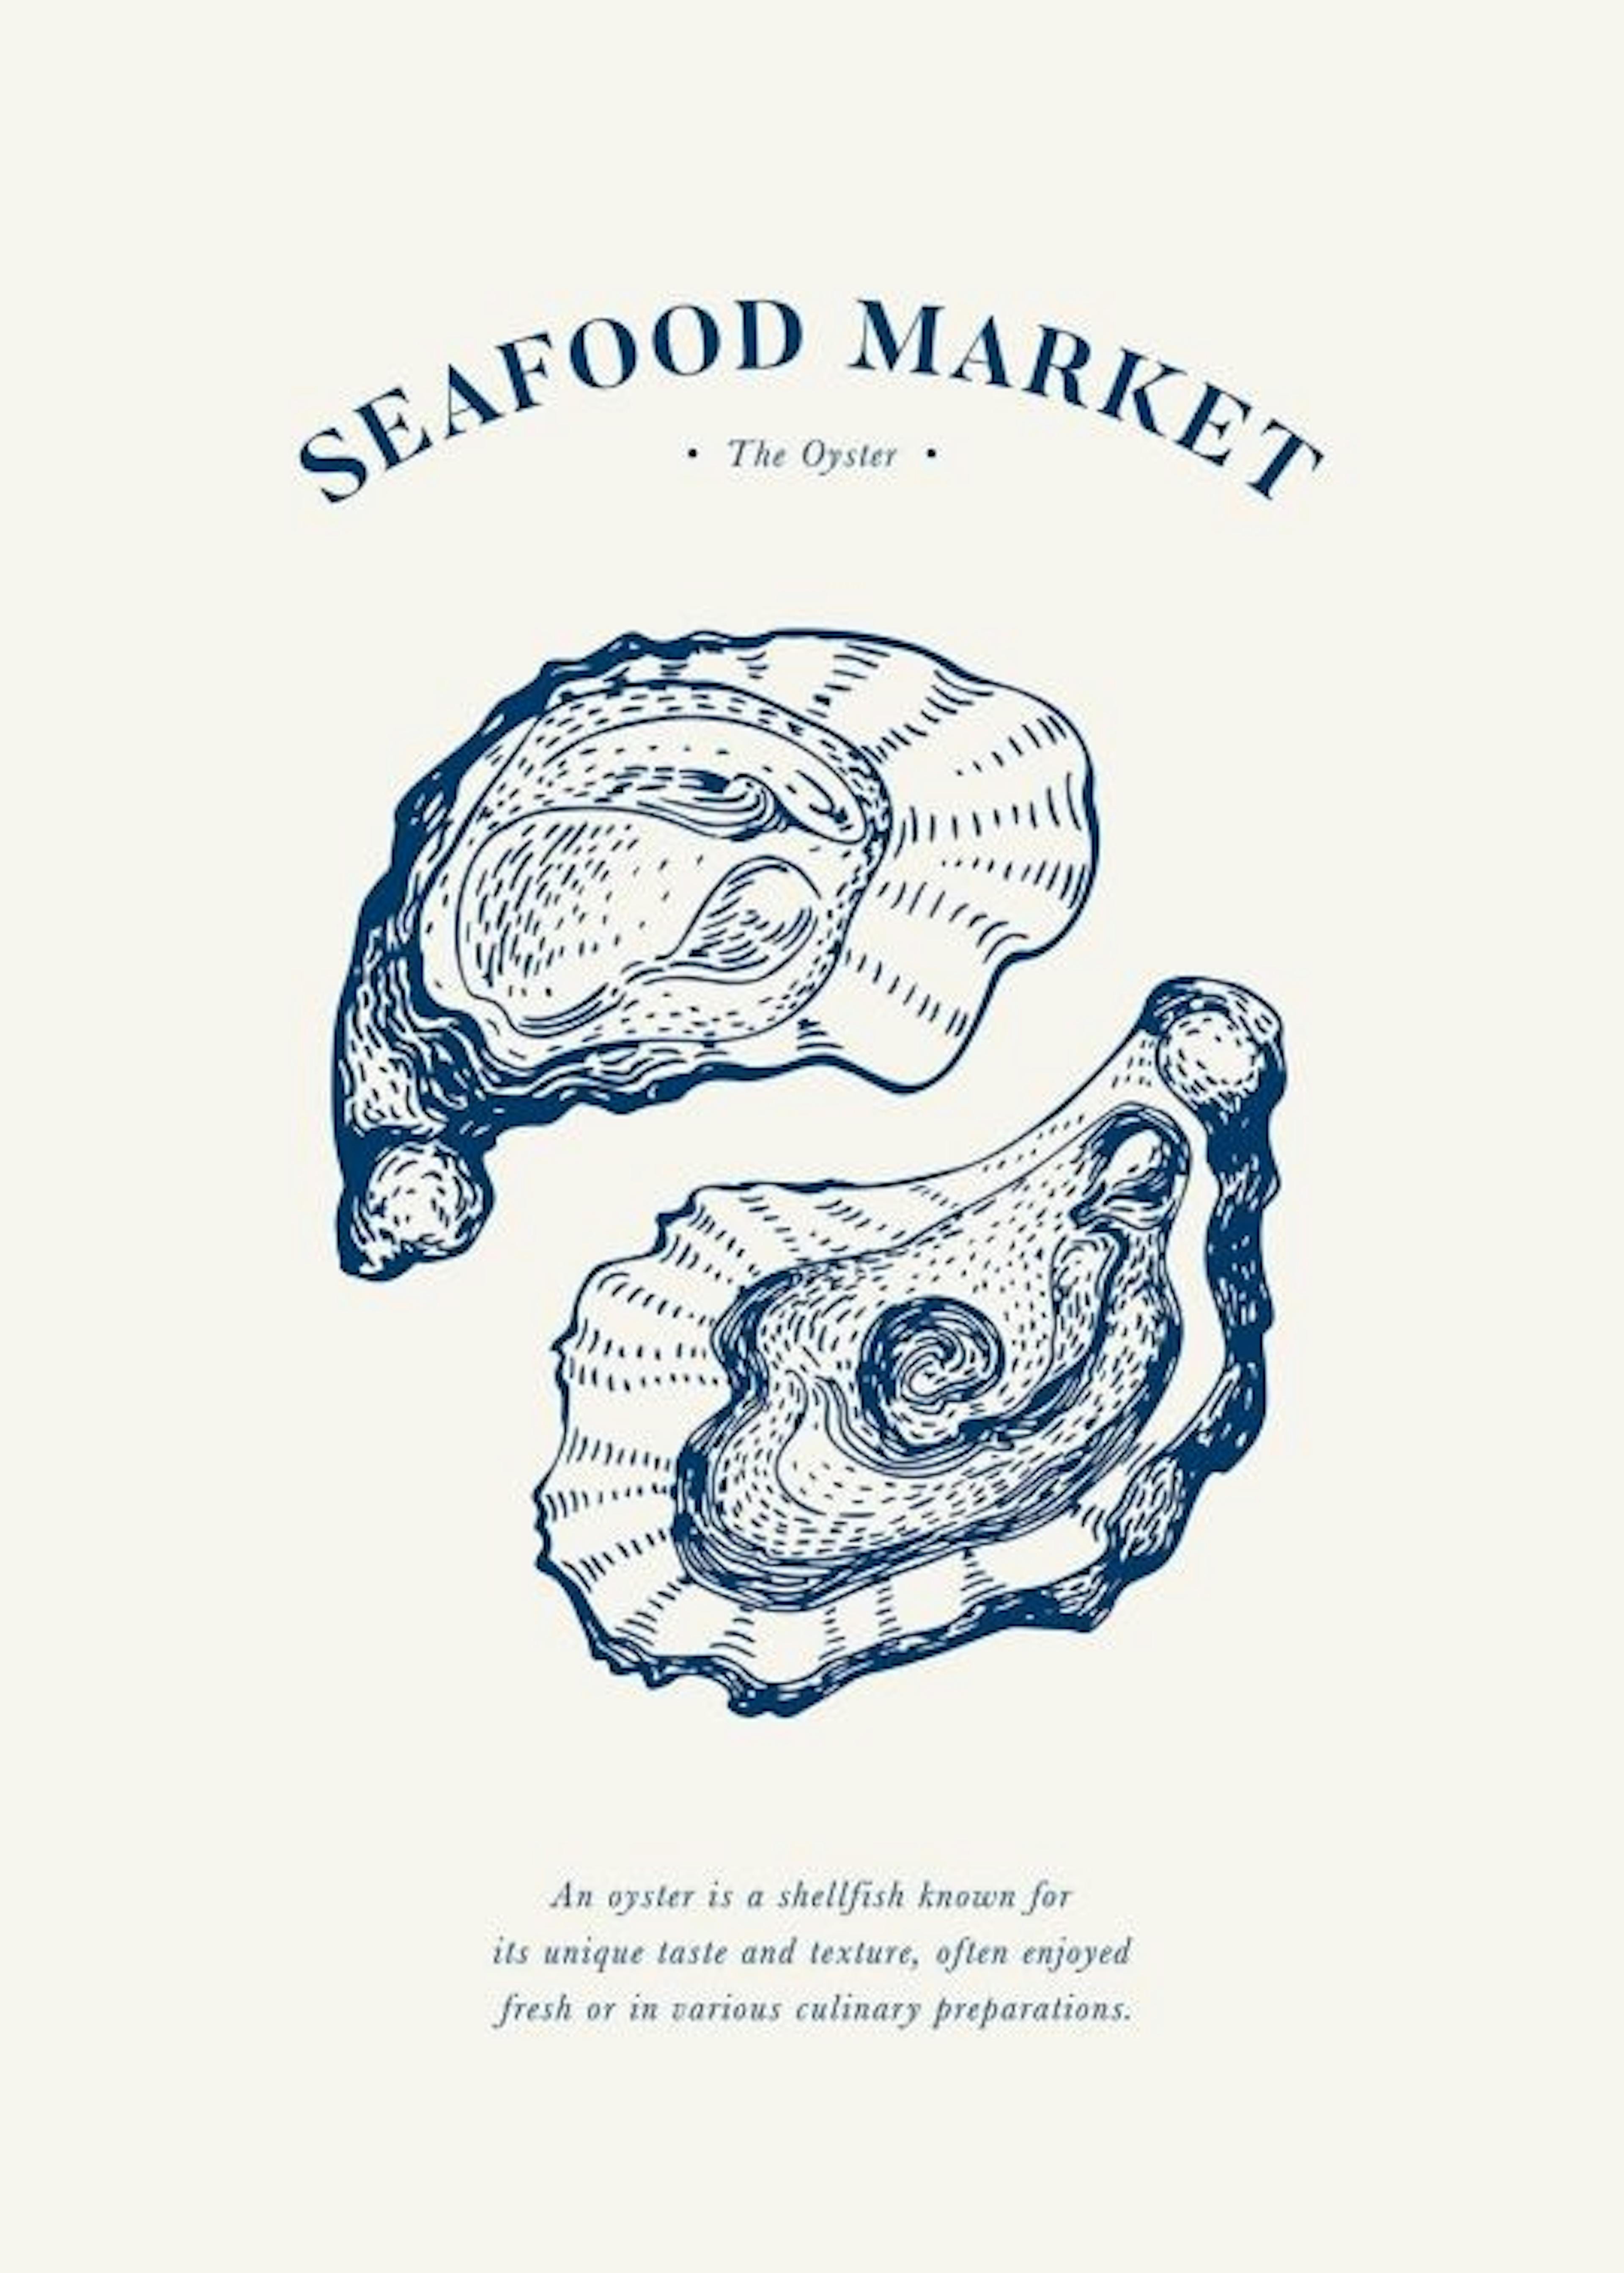 Seafood Market - The Oyster Affiche